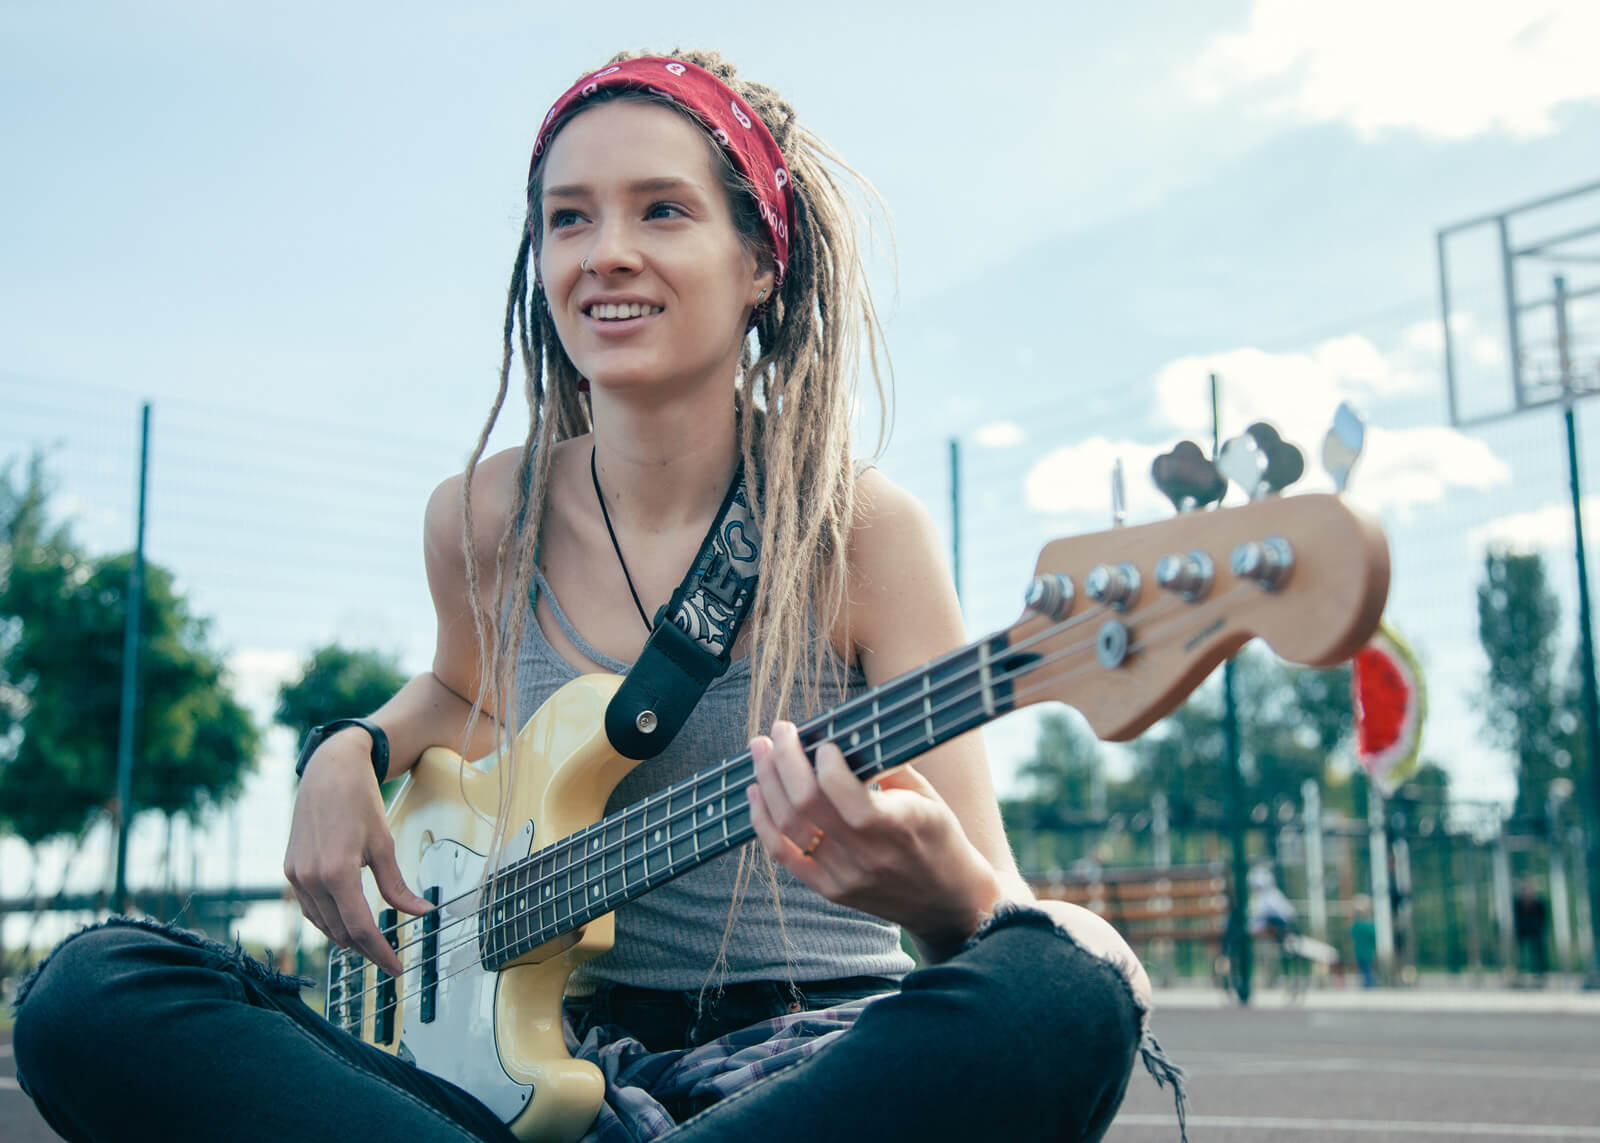 Beautiful long haired young woman sitting on the ground and smiling while enjoying playing the guitar